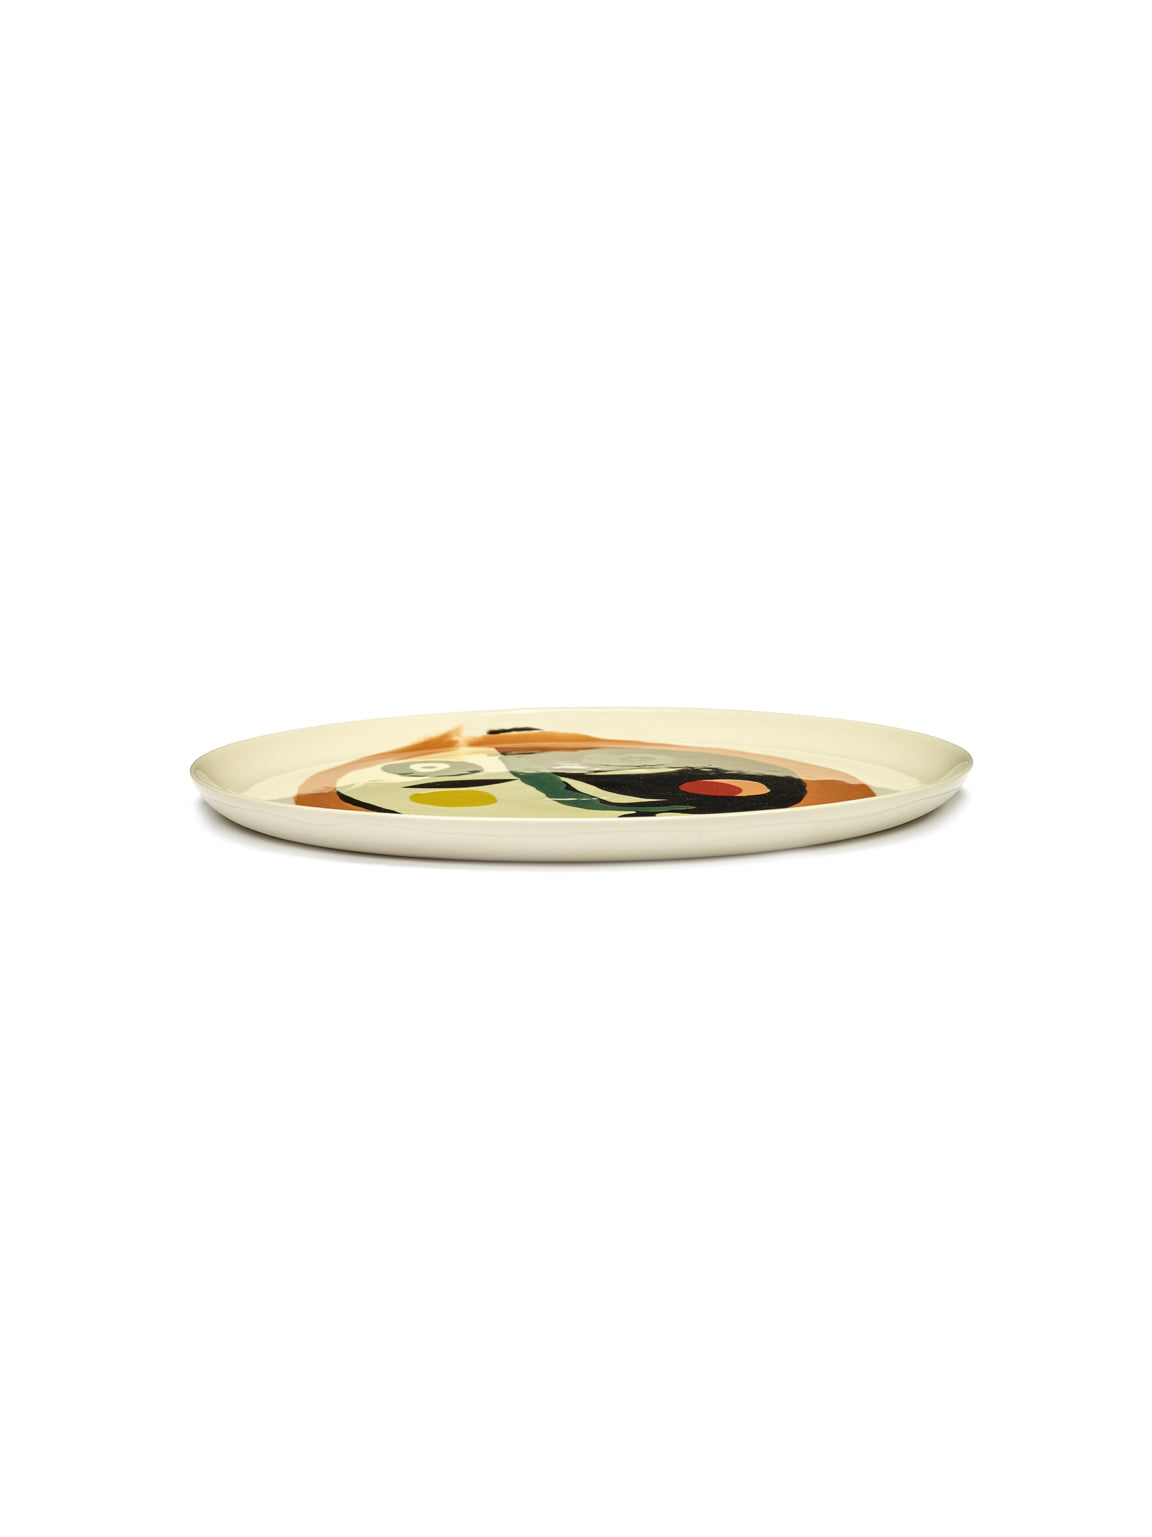 Ottolenghi Feast Large Serving Plate